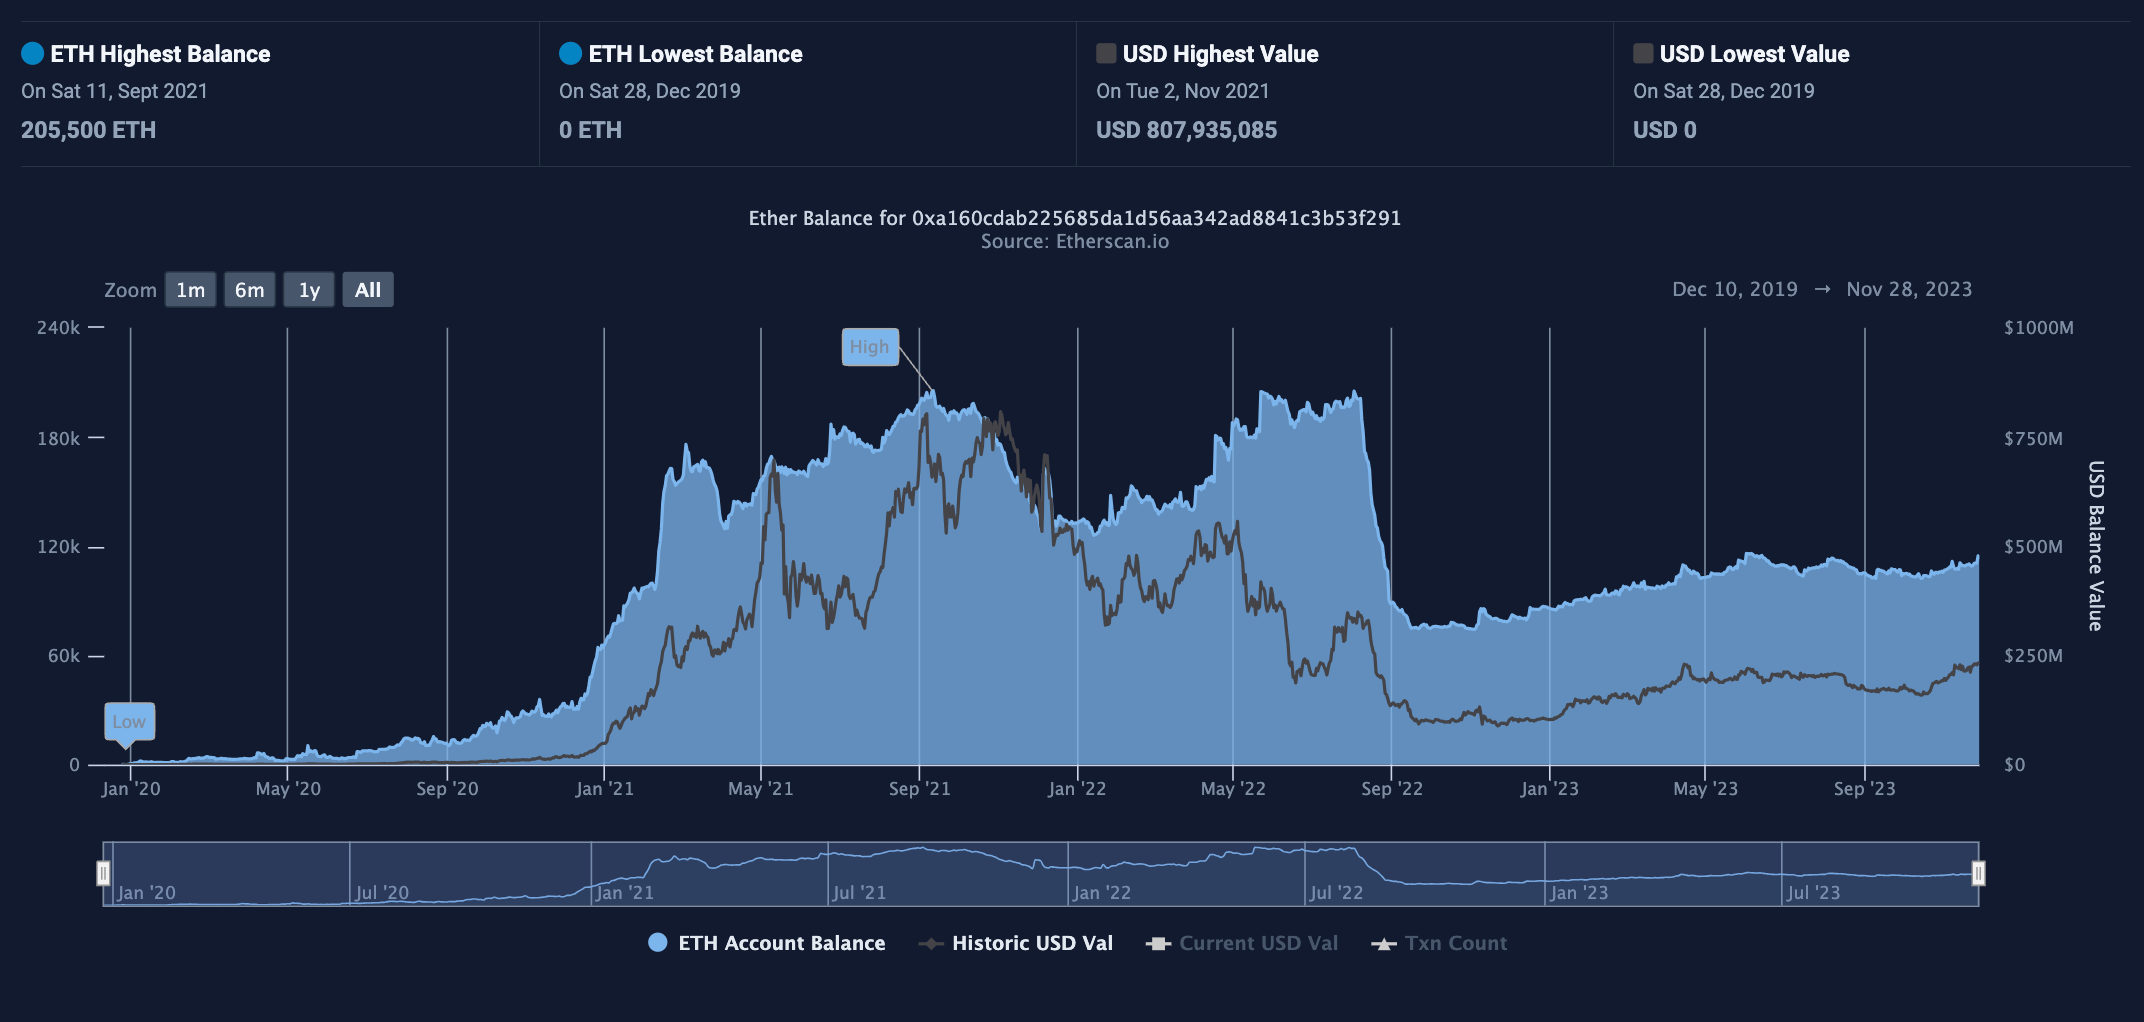 Tornado Cash's 100 ETH Contract Balance and USD Value Historical Data